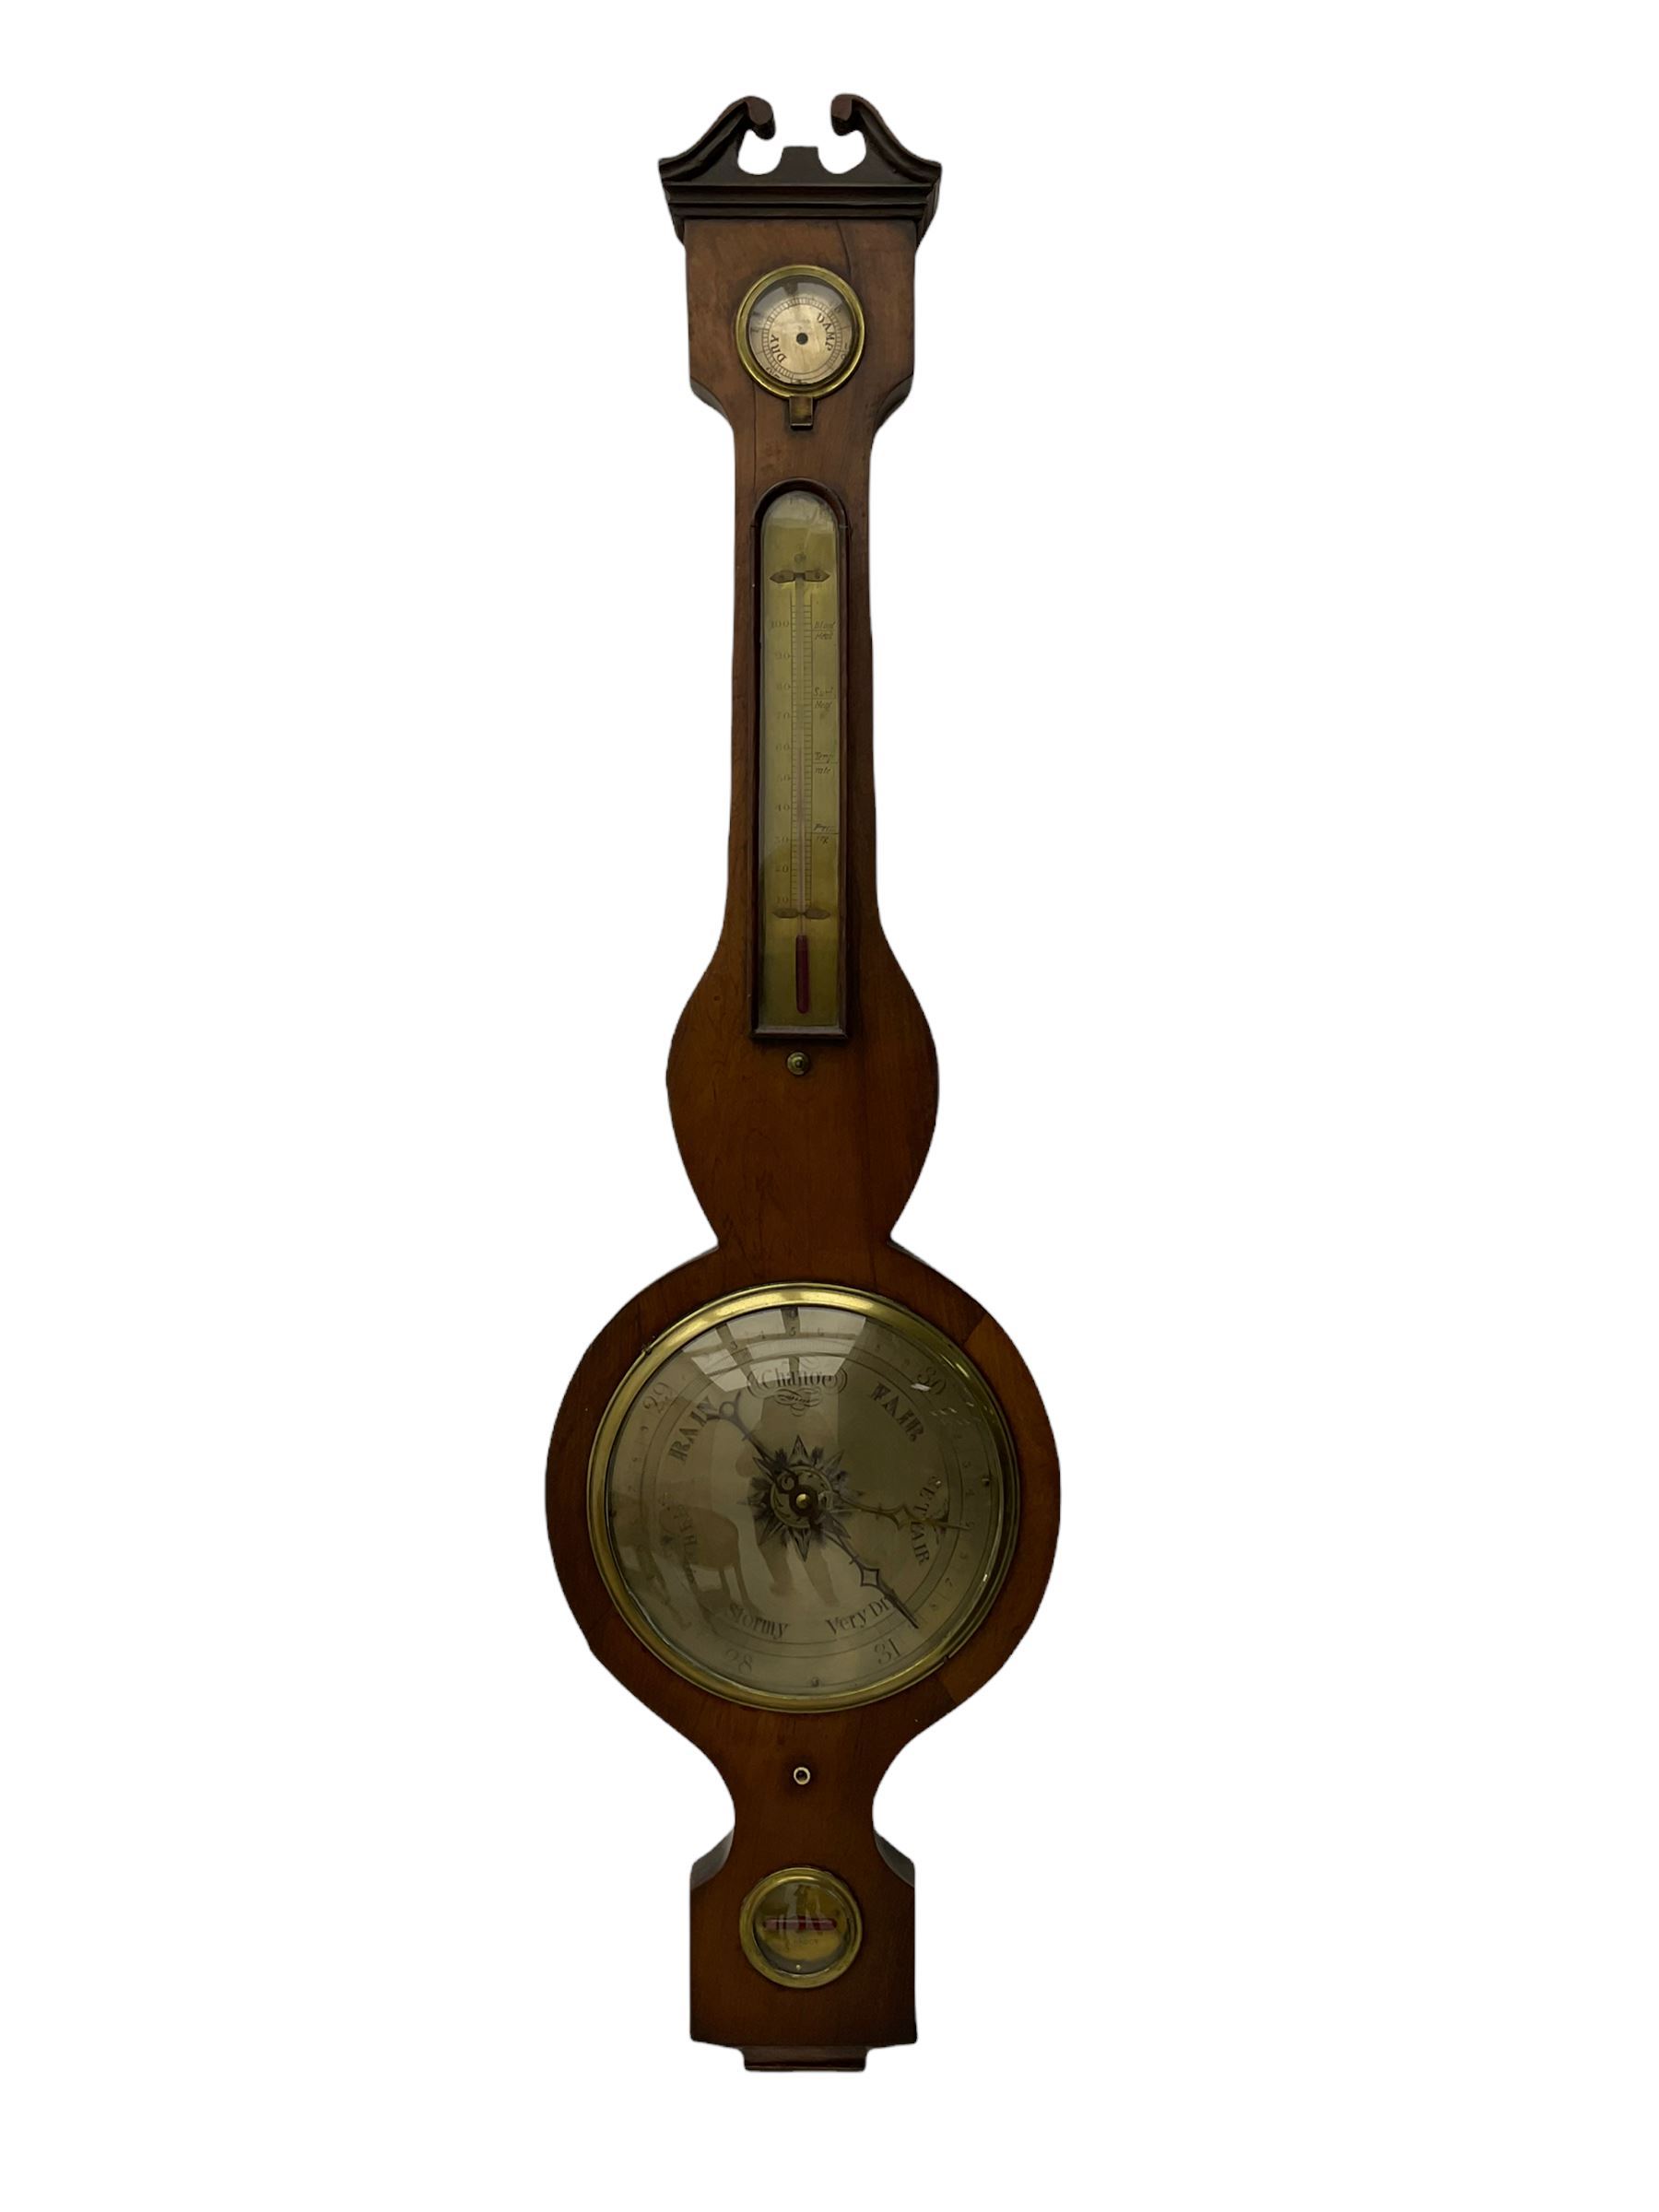 A 19th century four instrument mercury wheel barometer in a mahogany case with a swans neck pediment